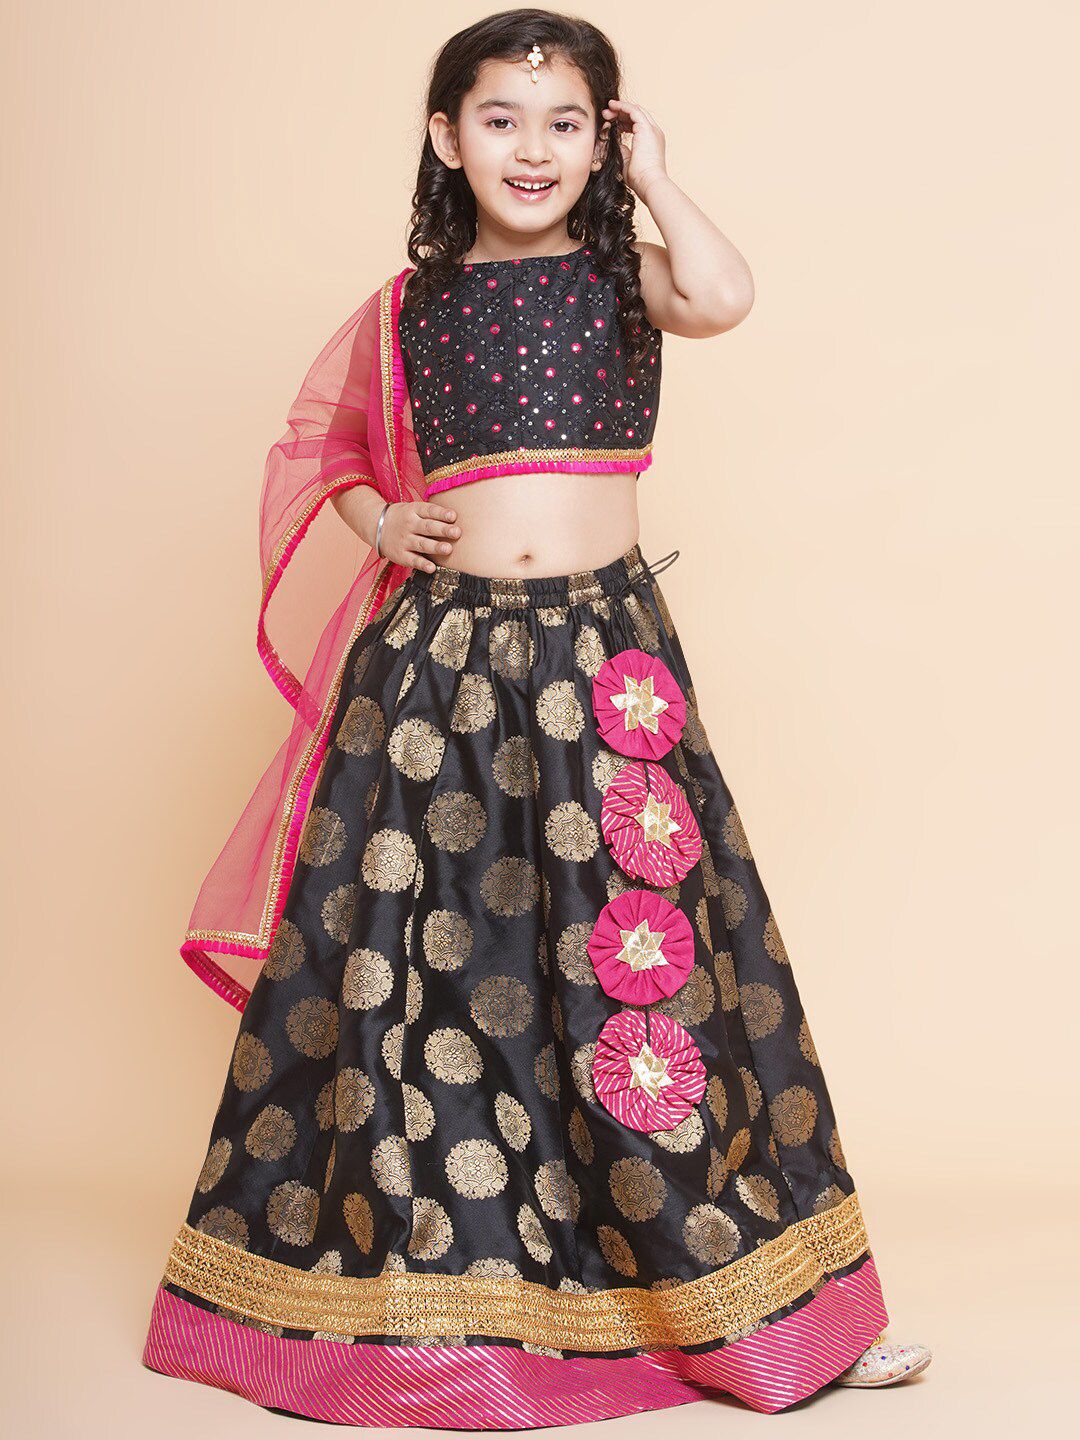 Bitiya by Bhama Girls Black & Gold-Toned Embroidered Ready to Wear Lehenga & Blouse With Dupatta Price in India